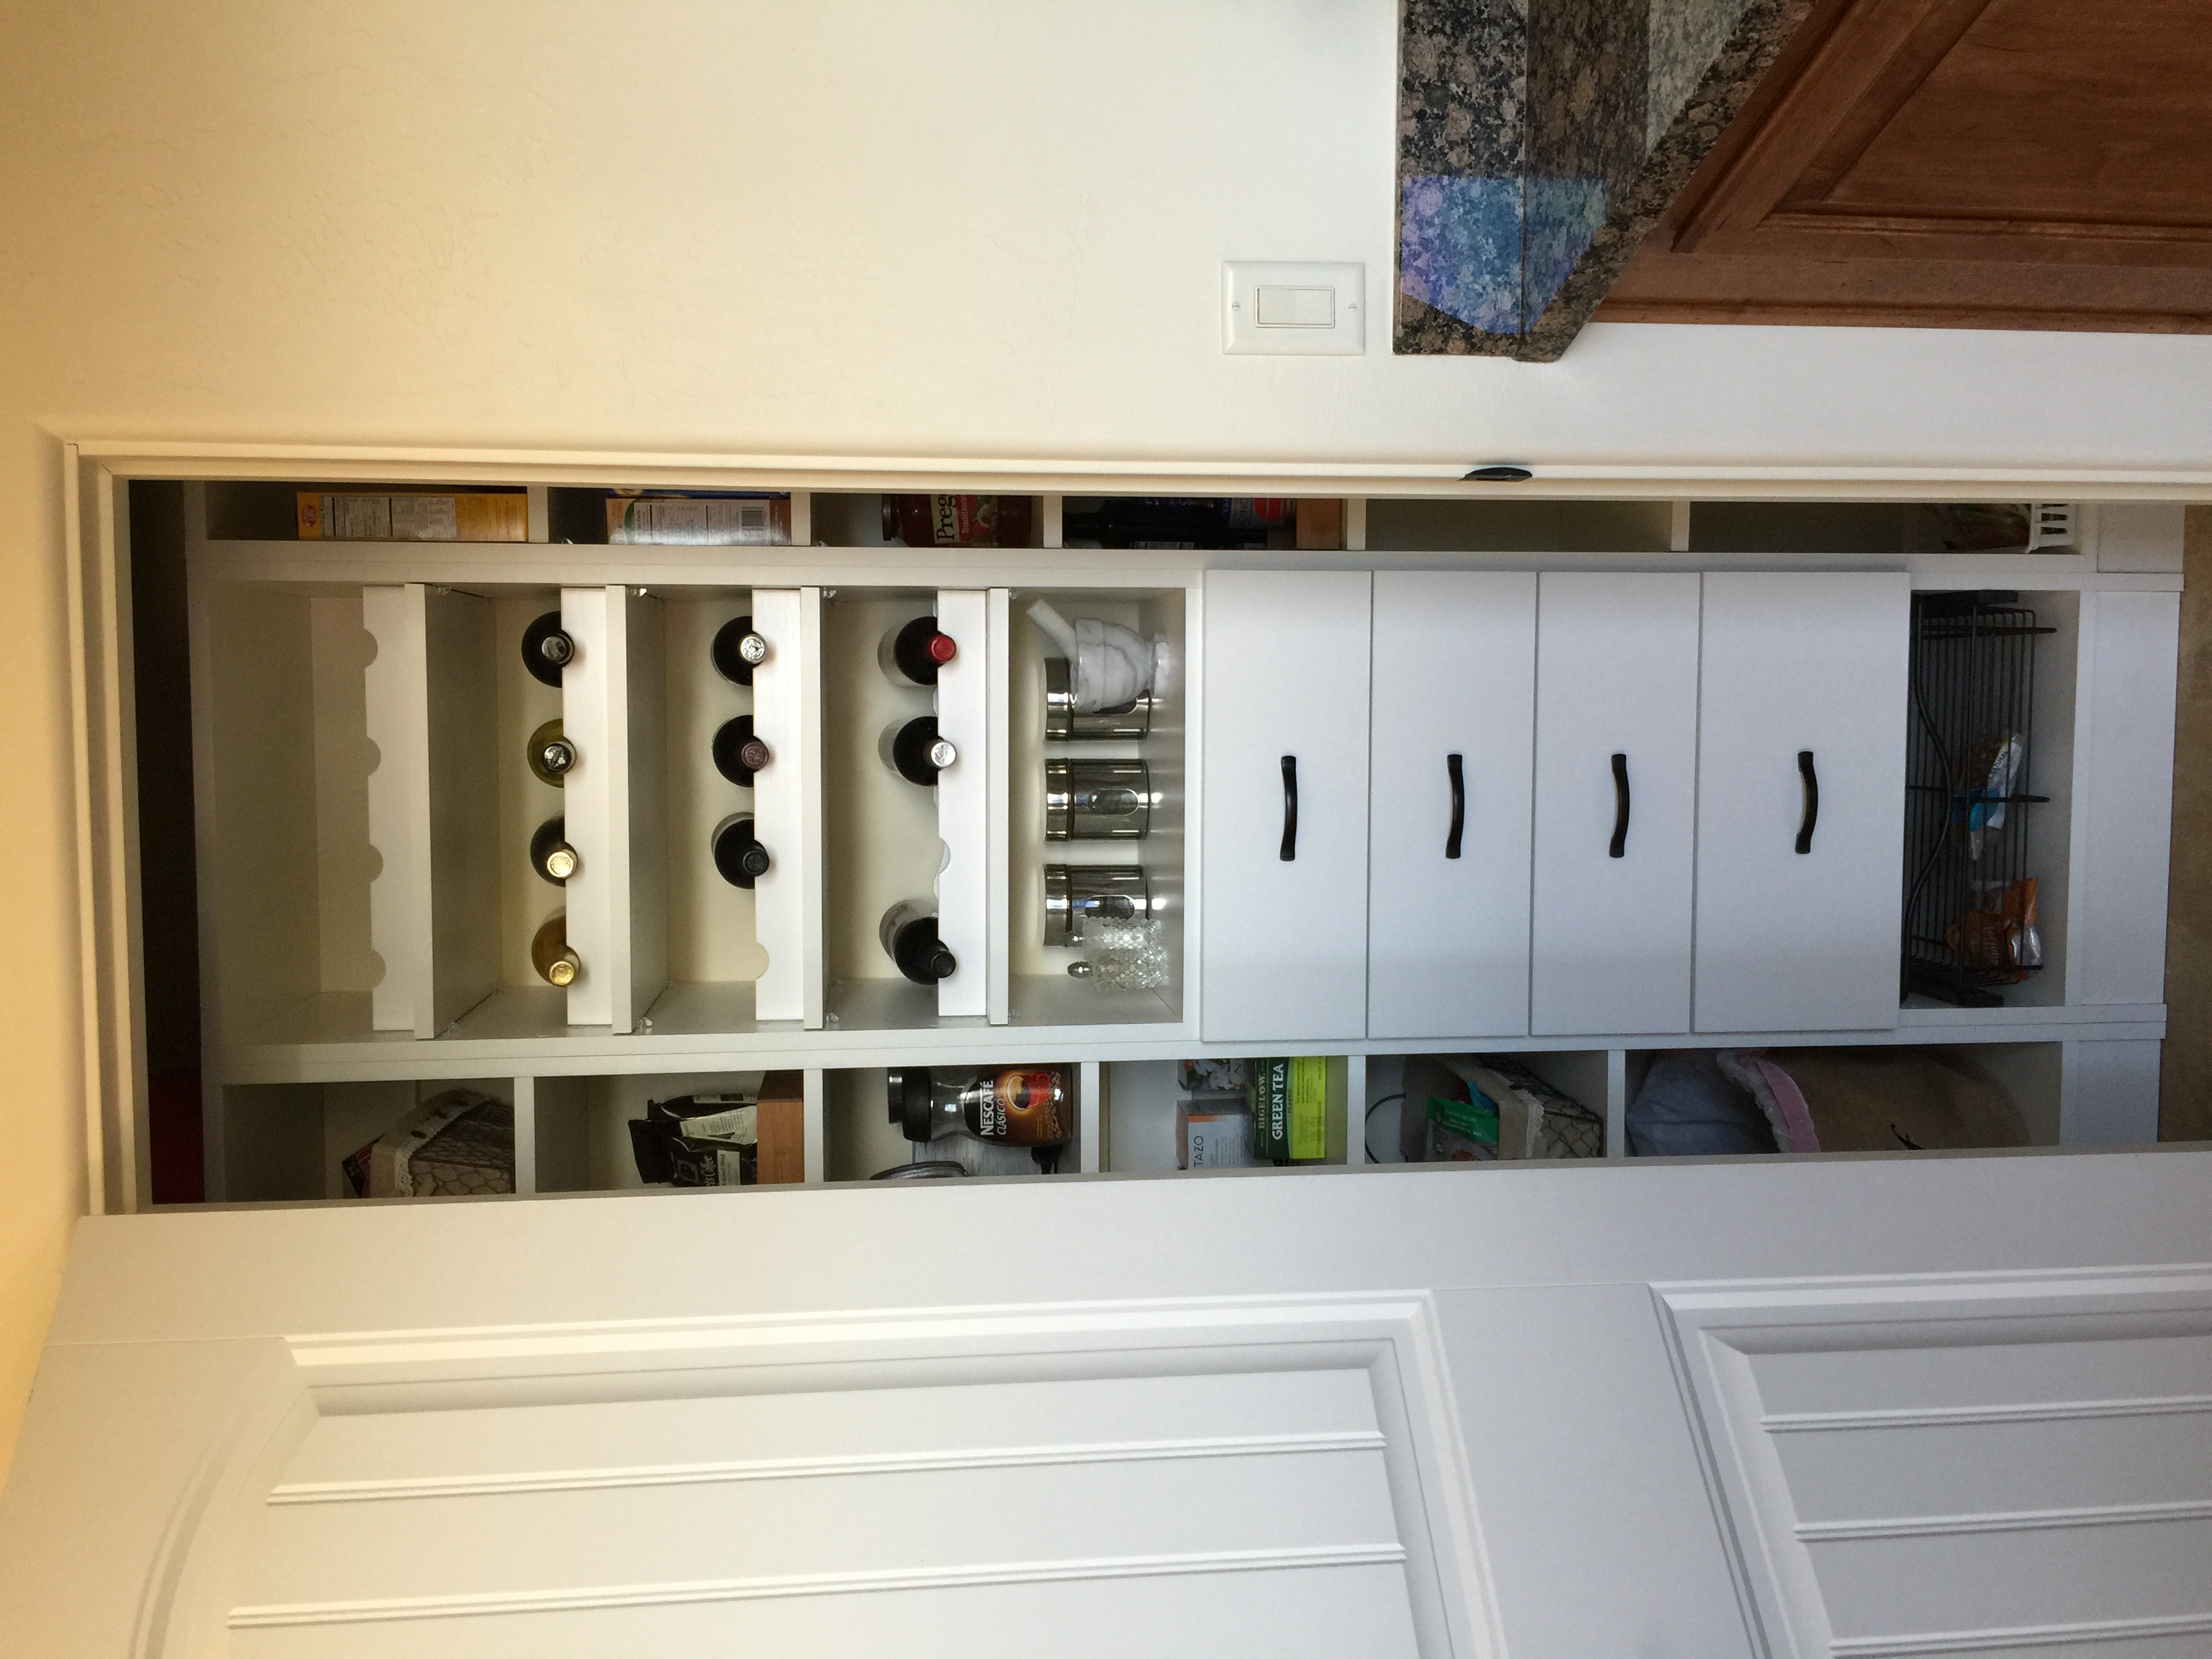 Pantry with shelves and wine racks